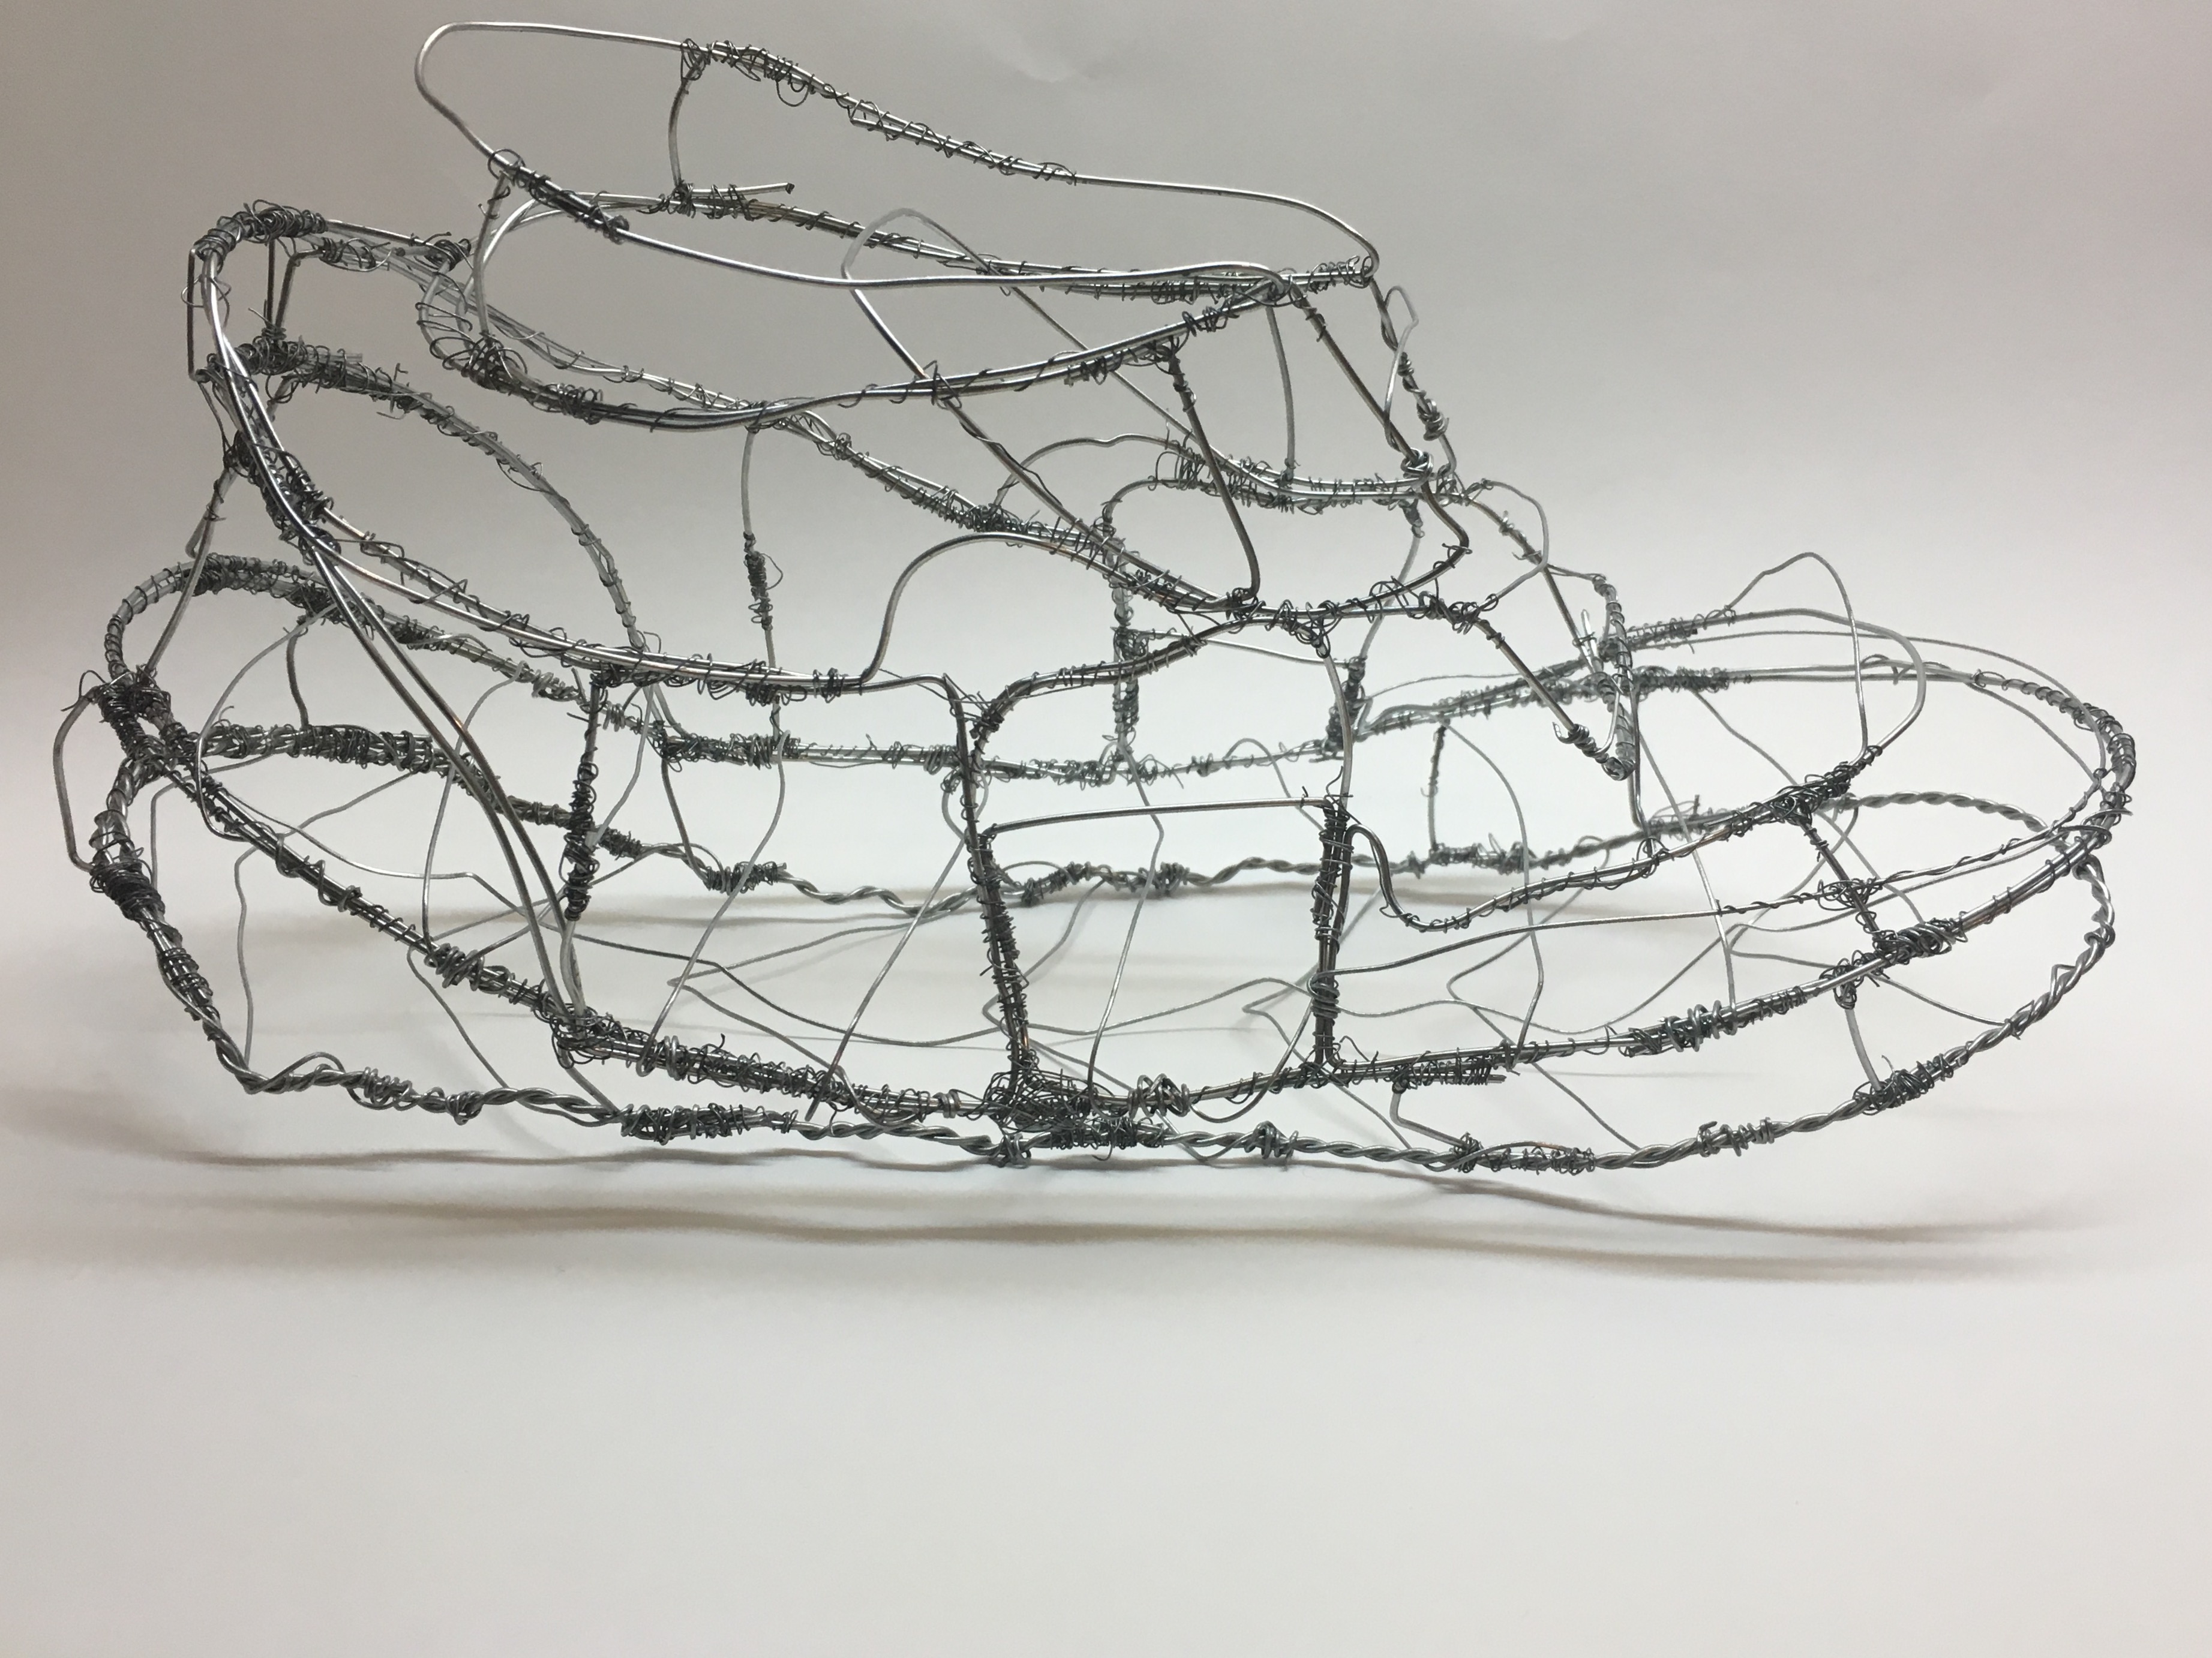 Space/Materiality: Haptic Space: Wire Shoe: Final Project